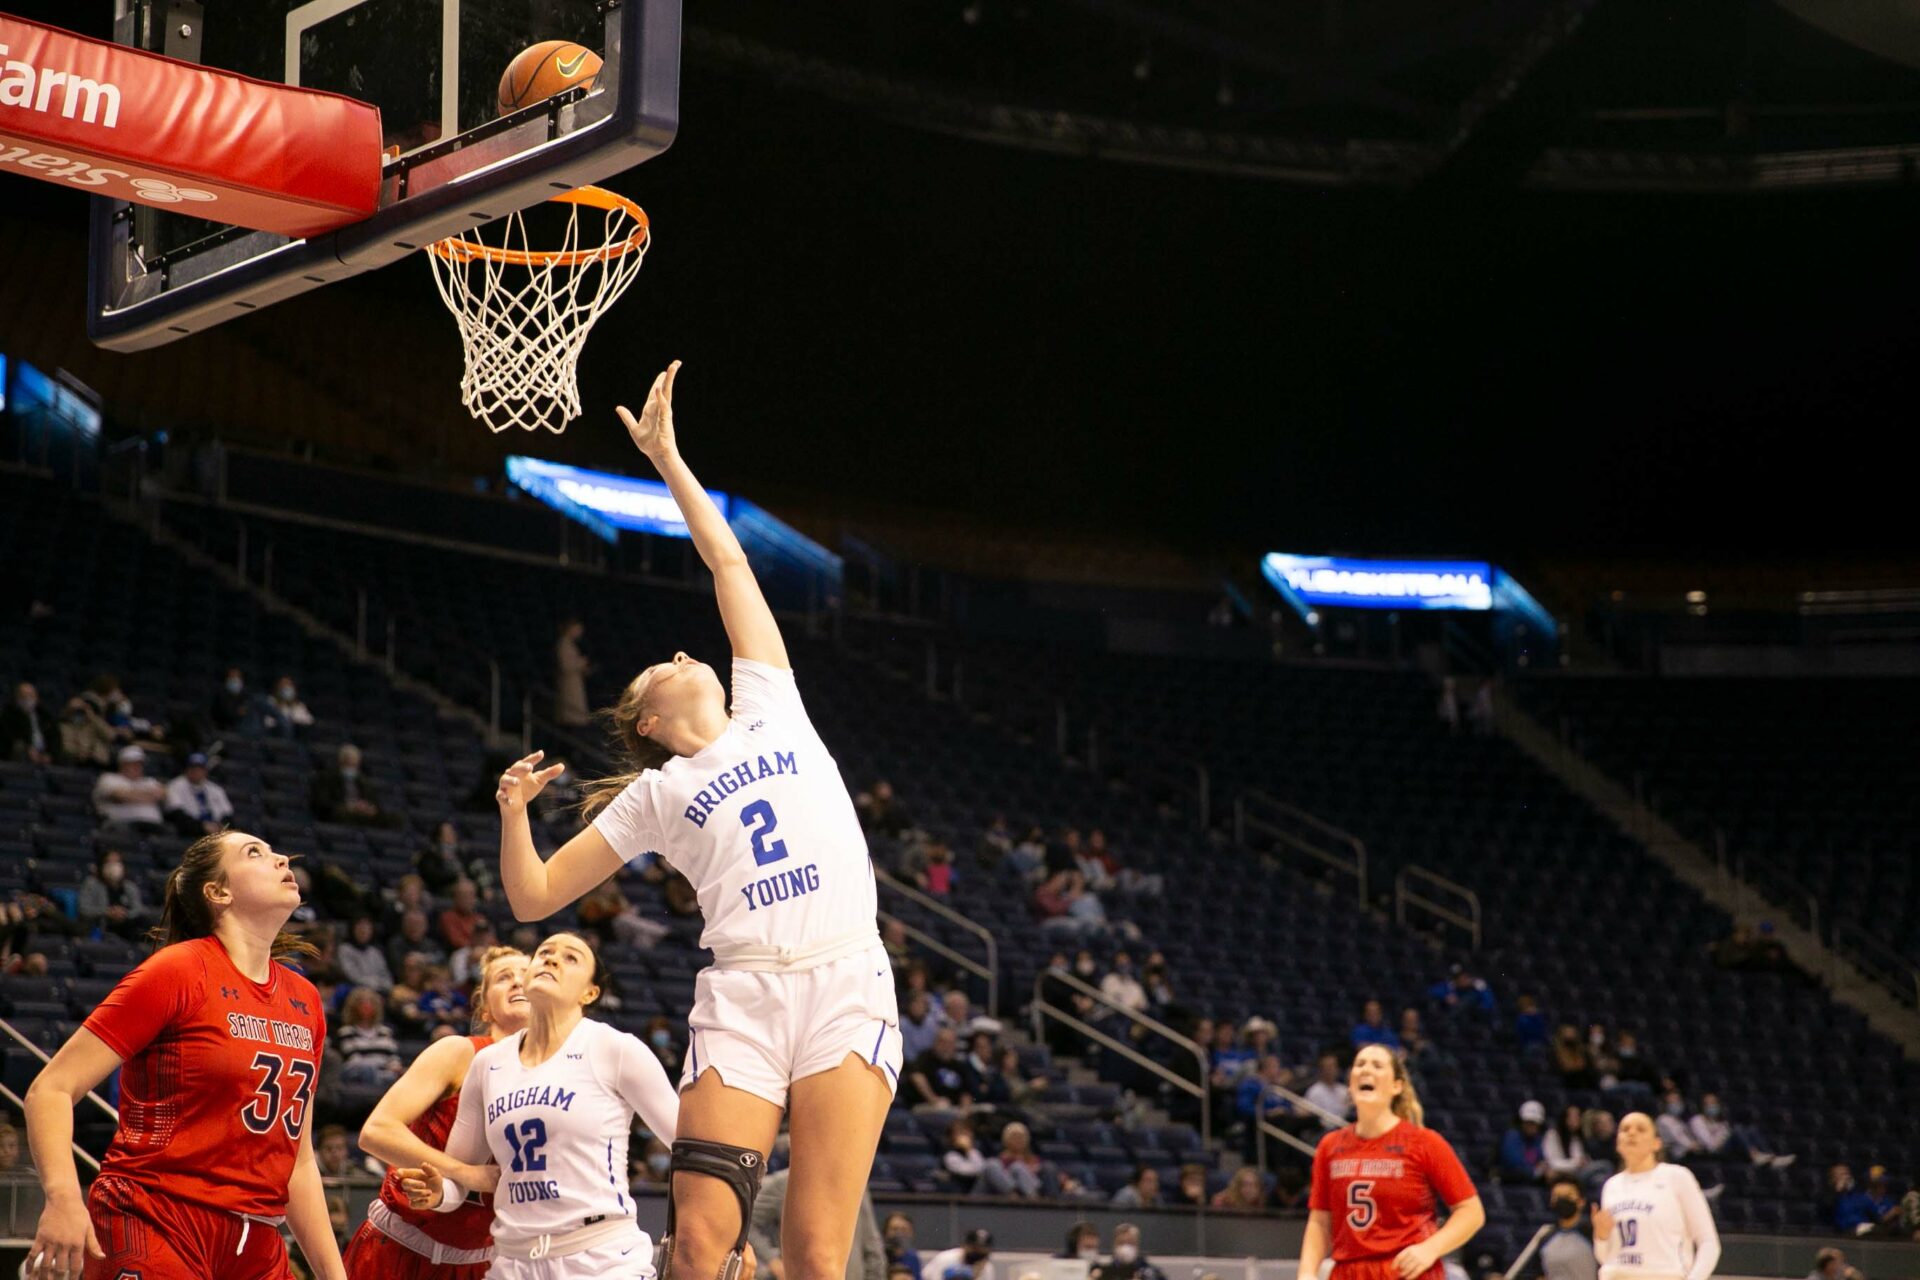 Defense shines in 7836 BYU women's basketball win over Saint Mary's